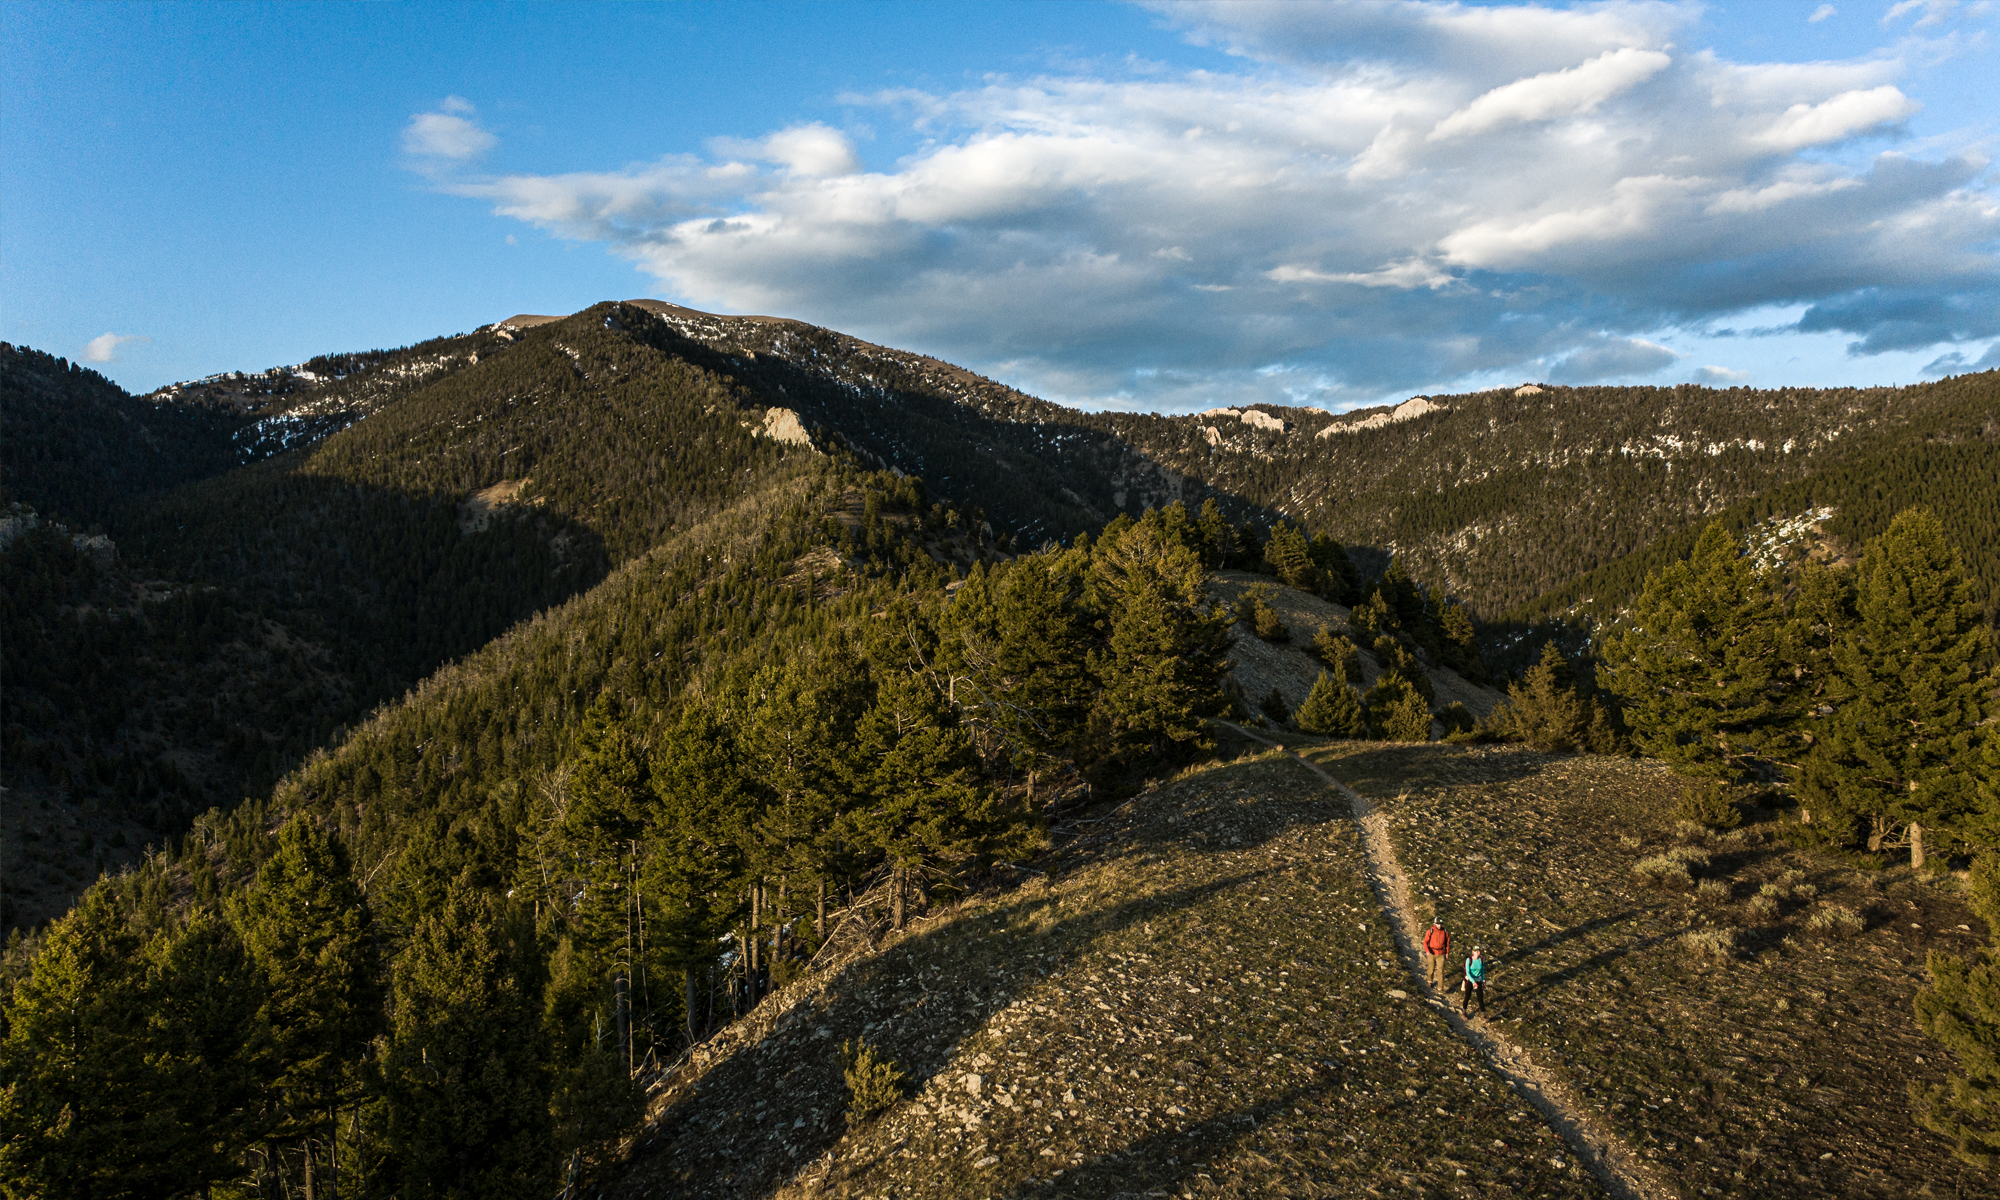 Aerial view of two people hiking on a trail in the mountains.